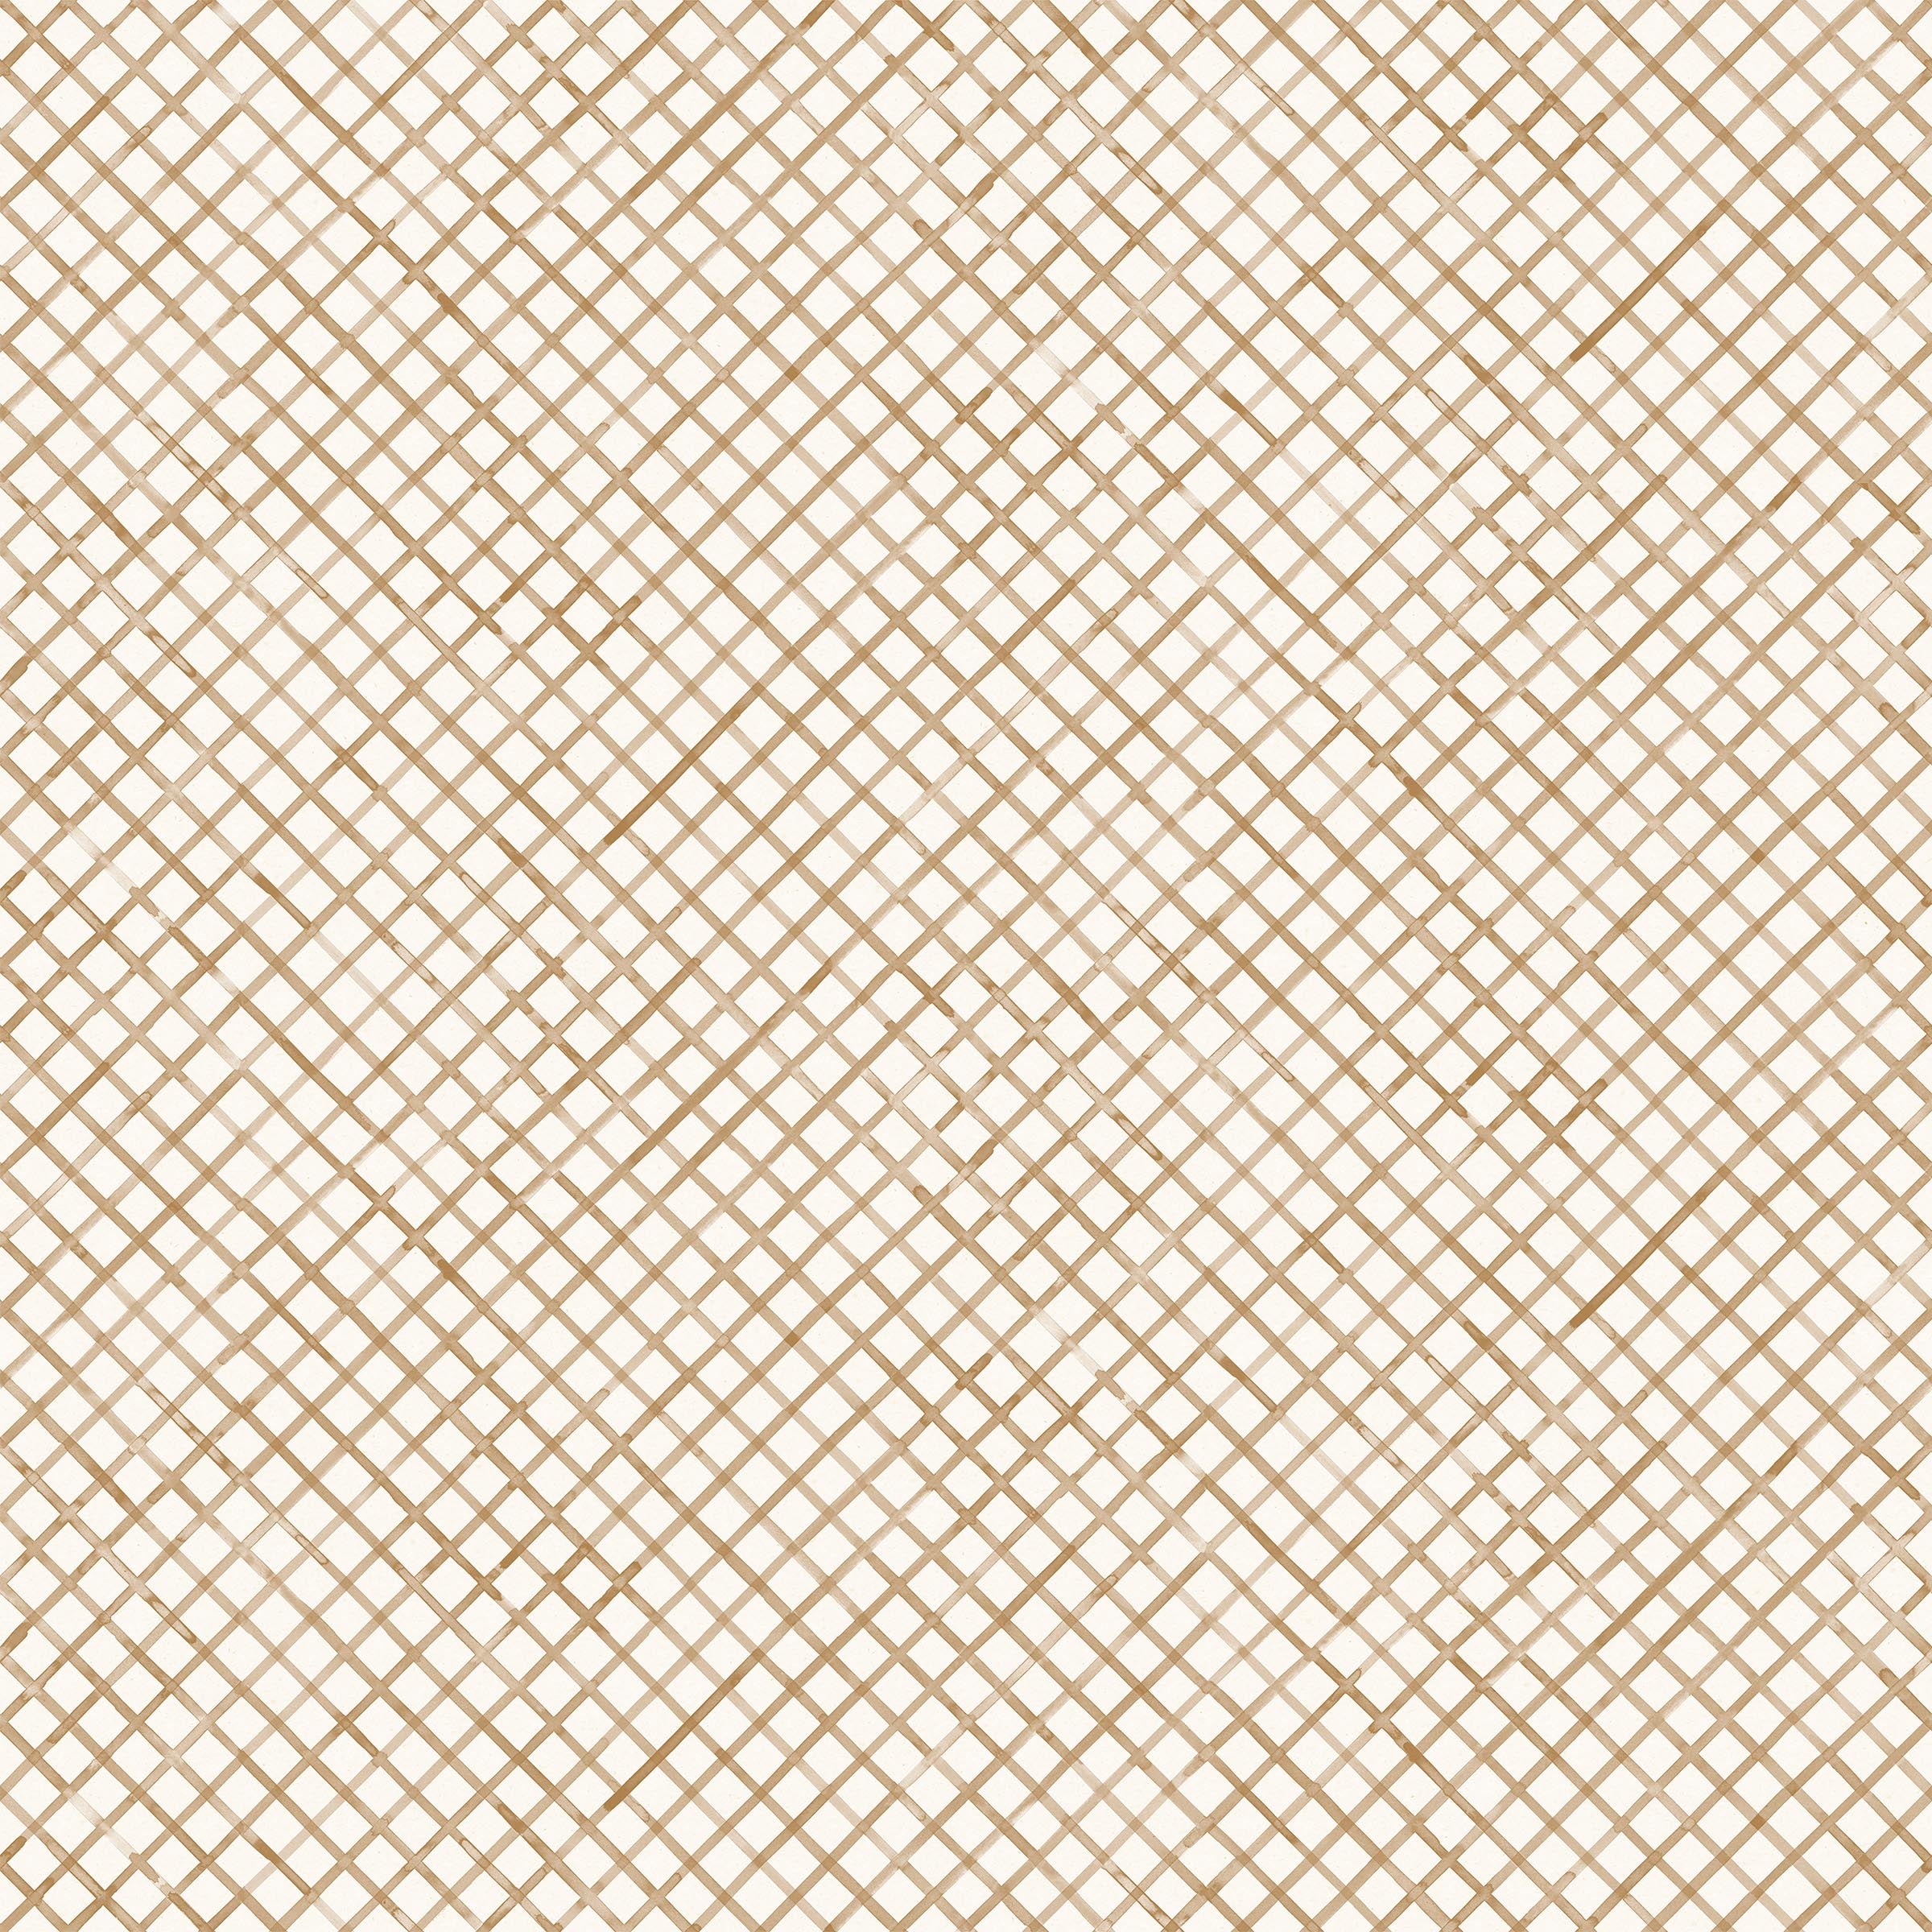 Detail of wallpaper in a painterly grid pattern in bronze on a white field.